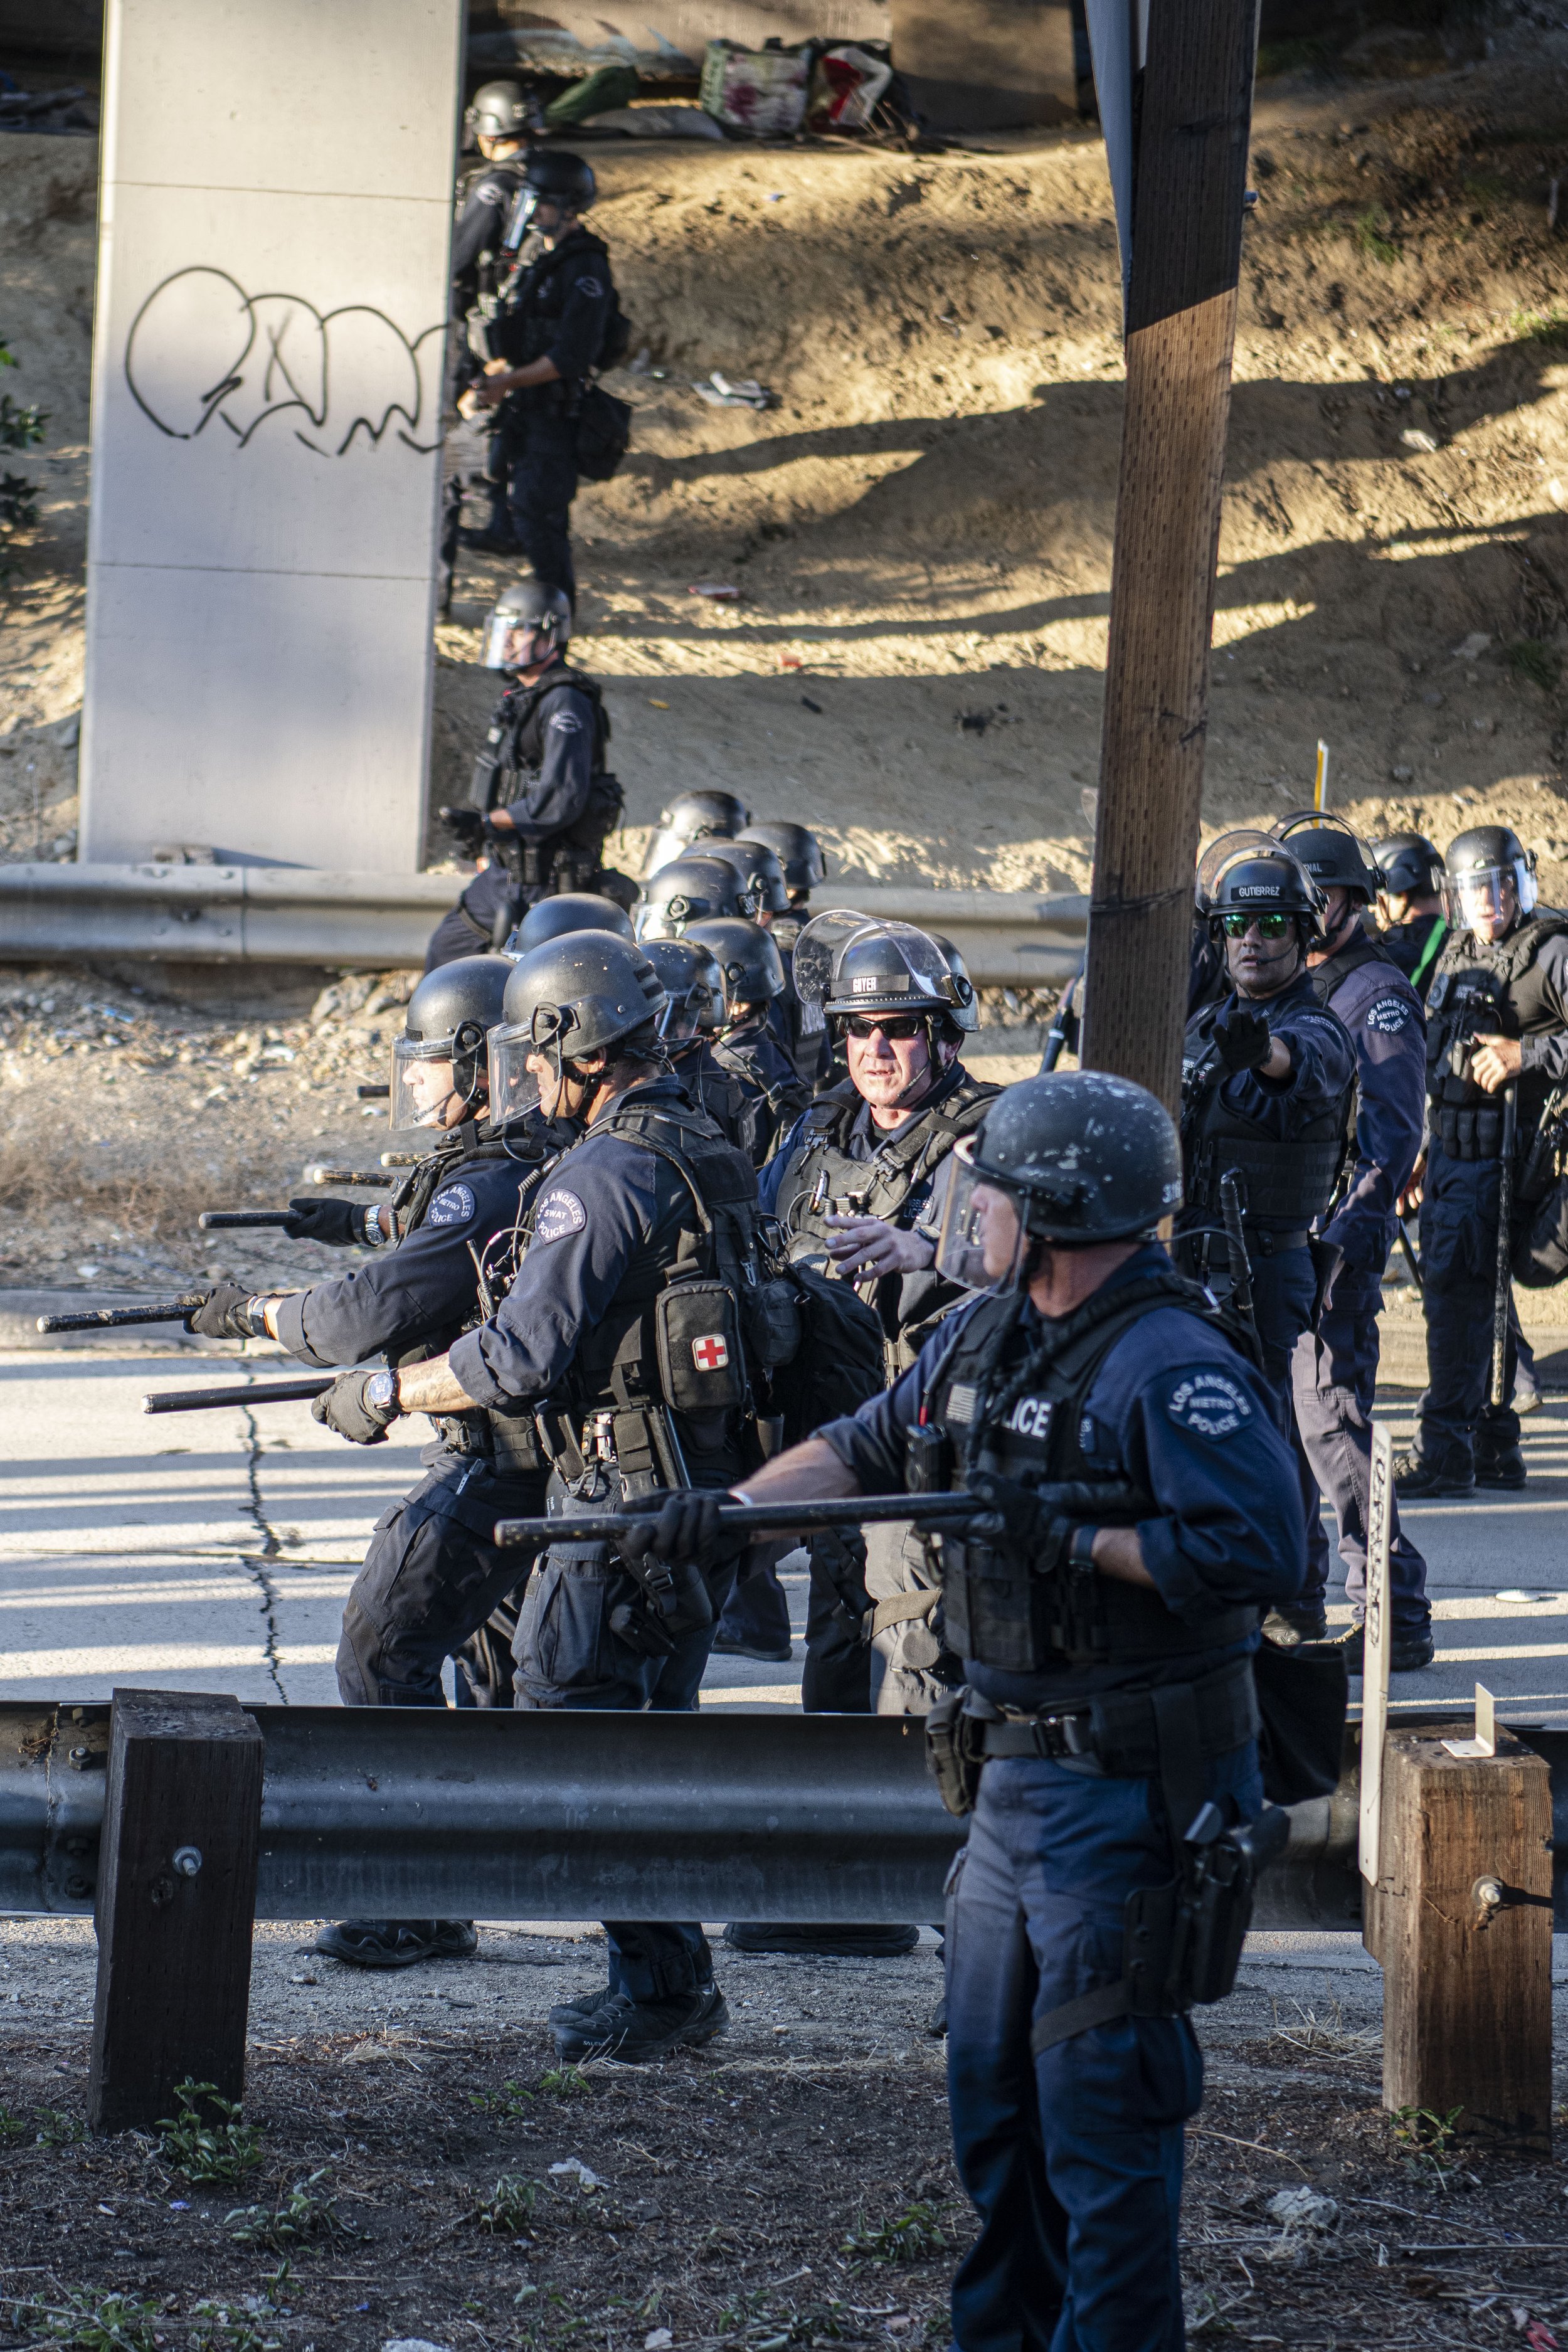  LAPD officers in full riot gear form a barrier line forcing the Abortion rights rally off the 110 Freeway. (Jon Putman | The Corsair) 